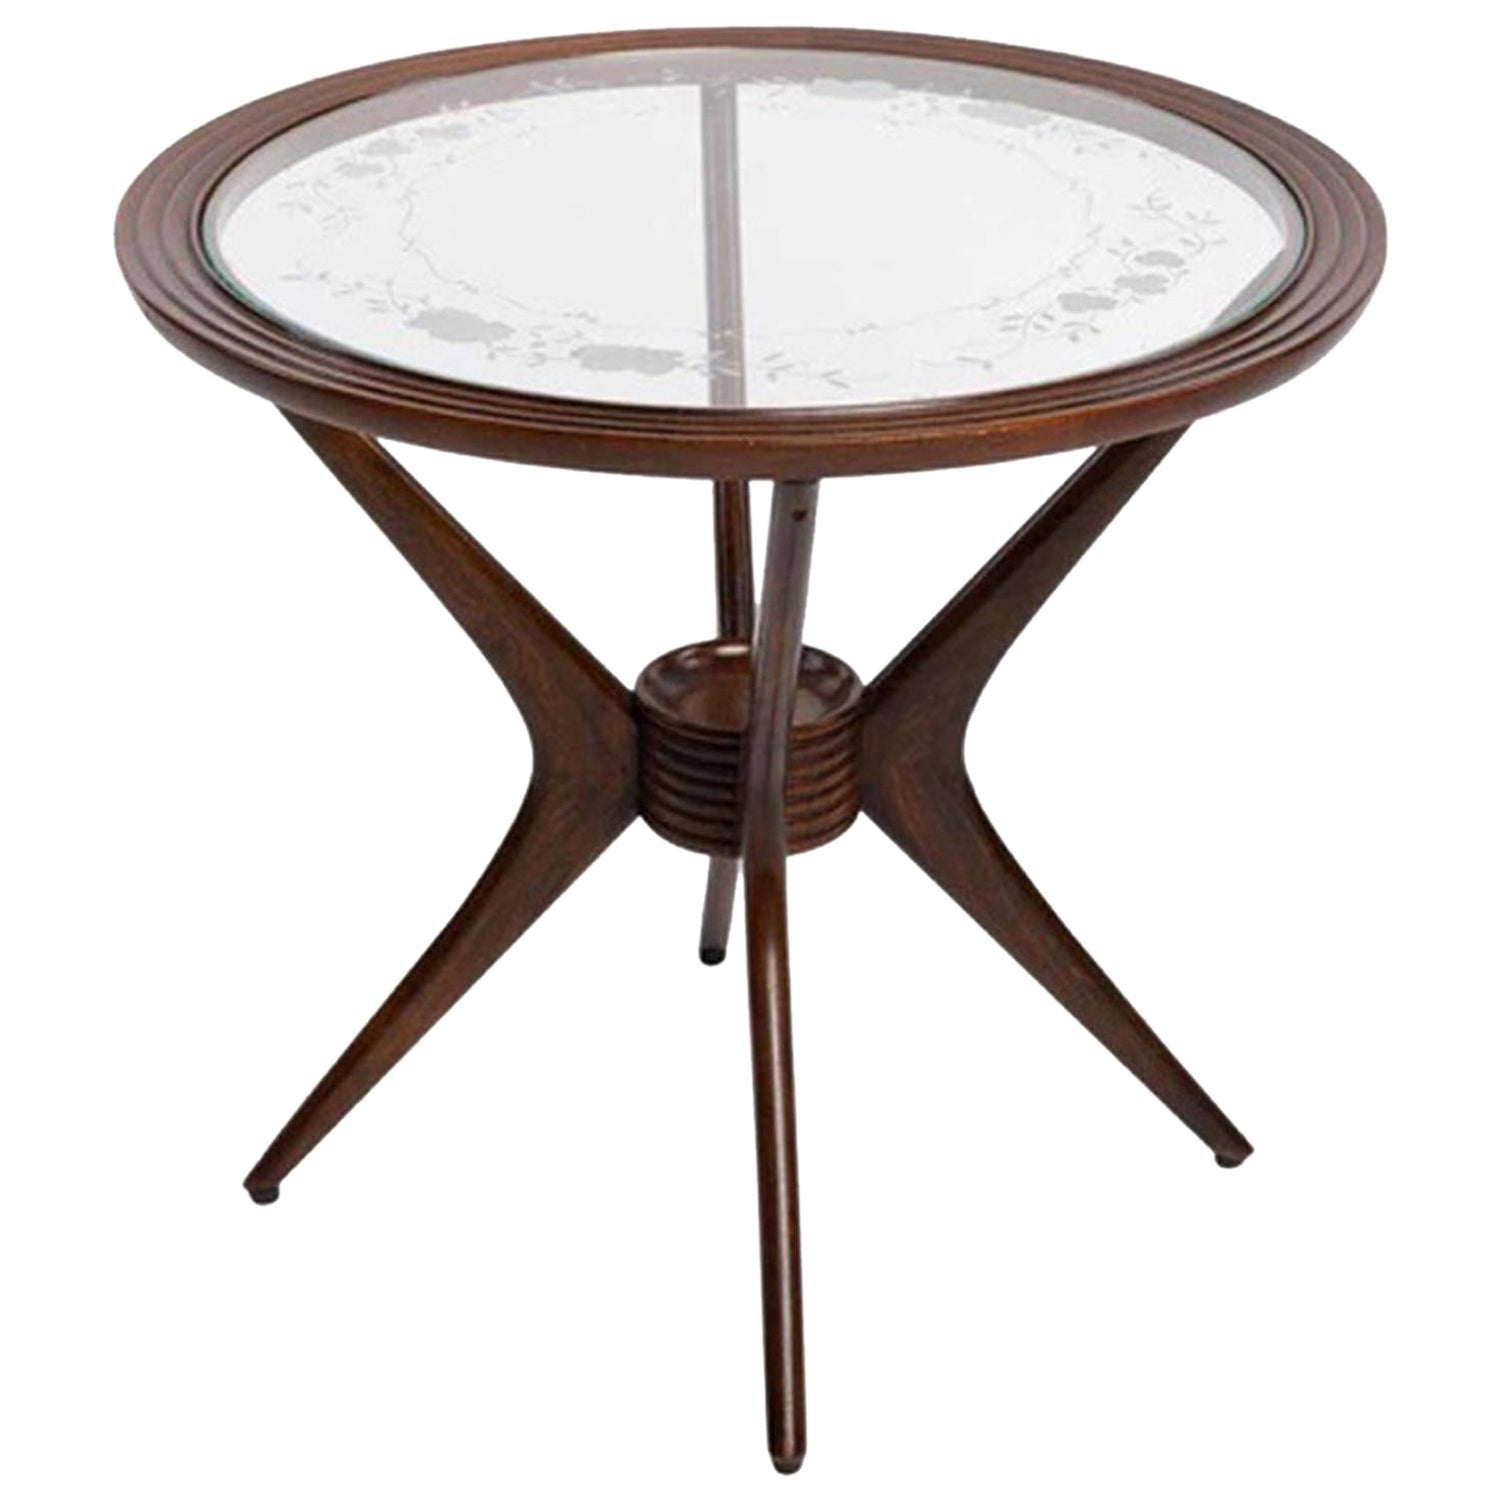 20th Century Italian Vintage Round Rosewood Sofa, Side Table by Paolo Buffa